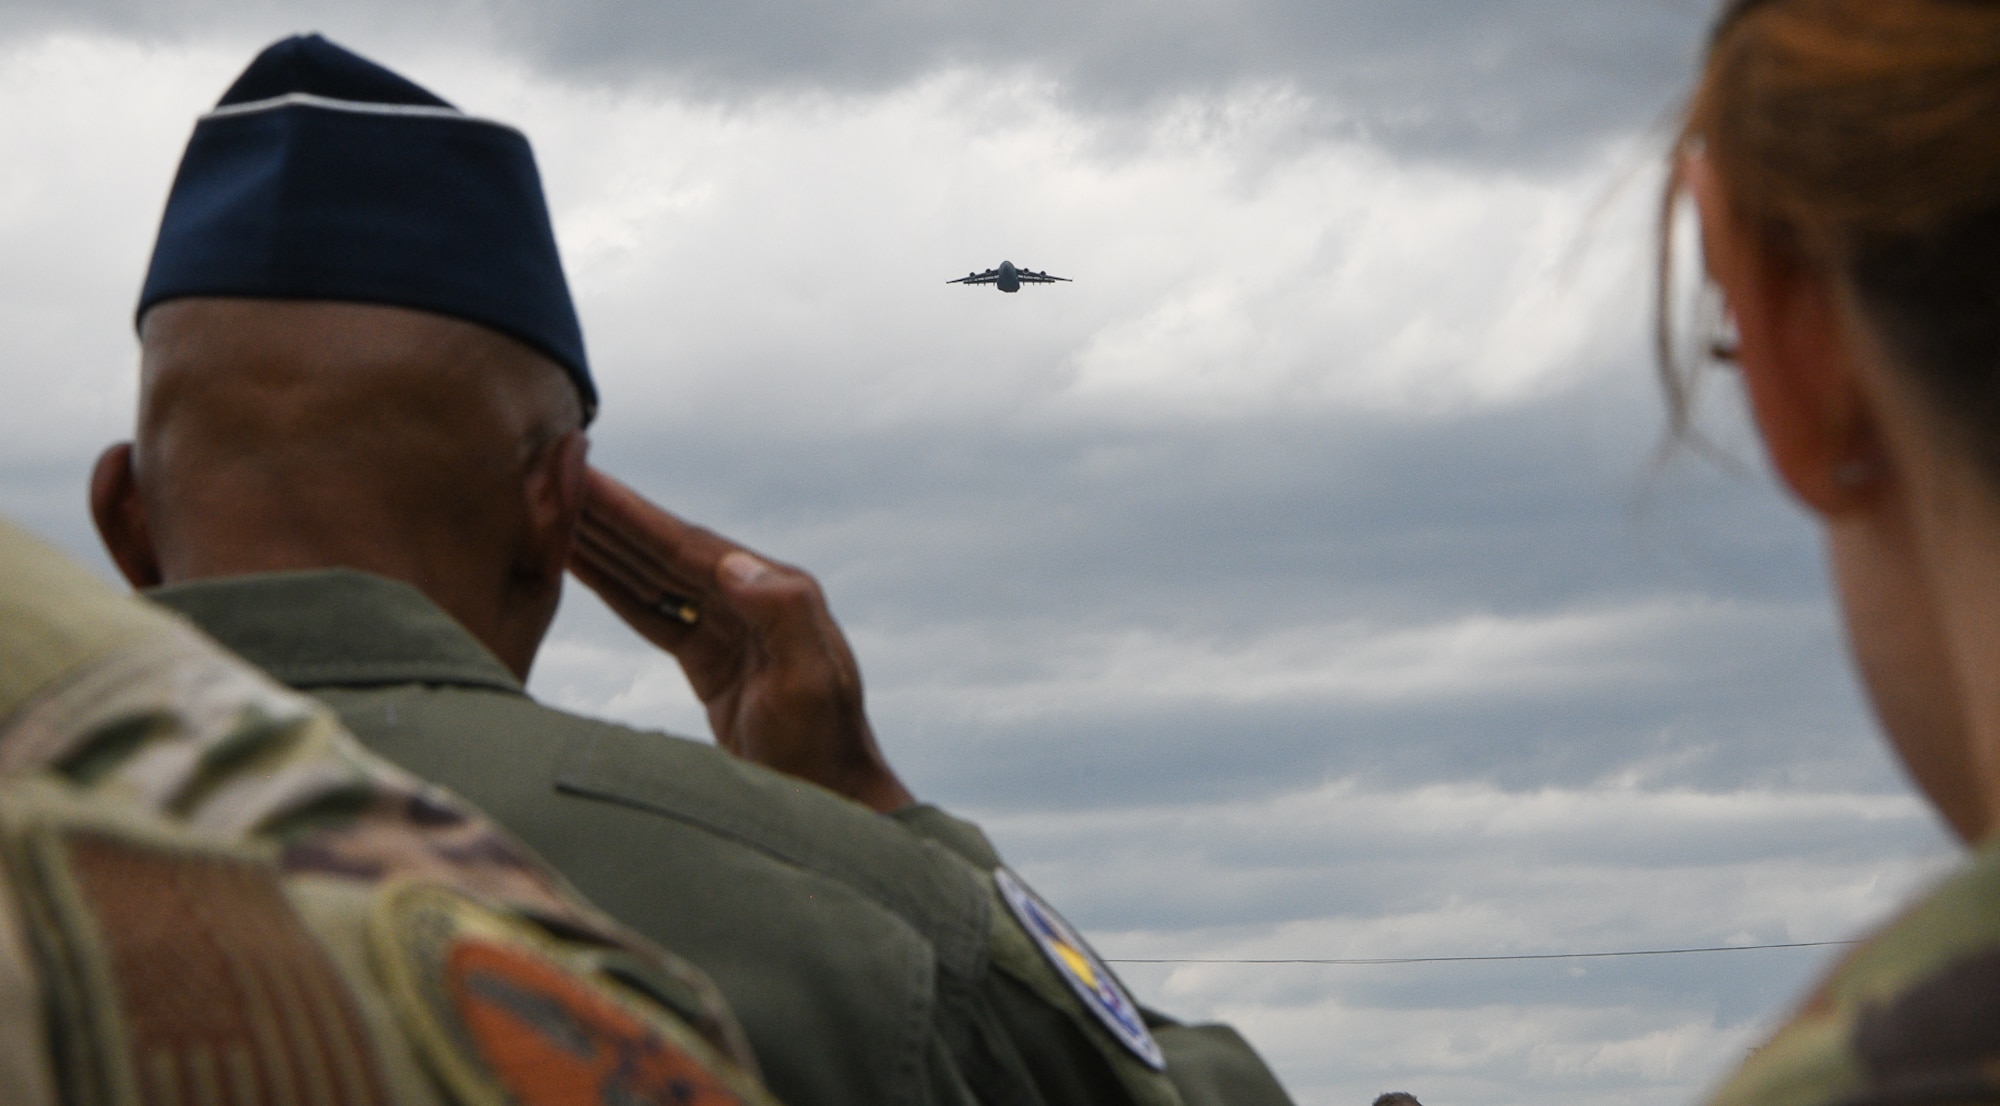 Air Force Chief of Staff Gen. CQ Brown, Jr., renders a salute during the playing of the National Anthem and opening ceremonies for the Kwik Trip 250 NASCAR Cup Series race at Road America near Elkhart Lake, Wisconsin, July 3, 2022 while a C-17 Globemaster III performs a flyover.